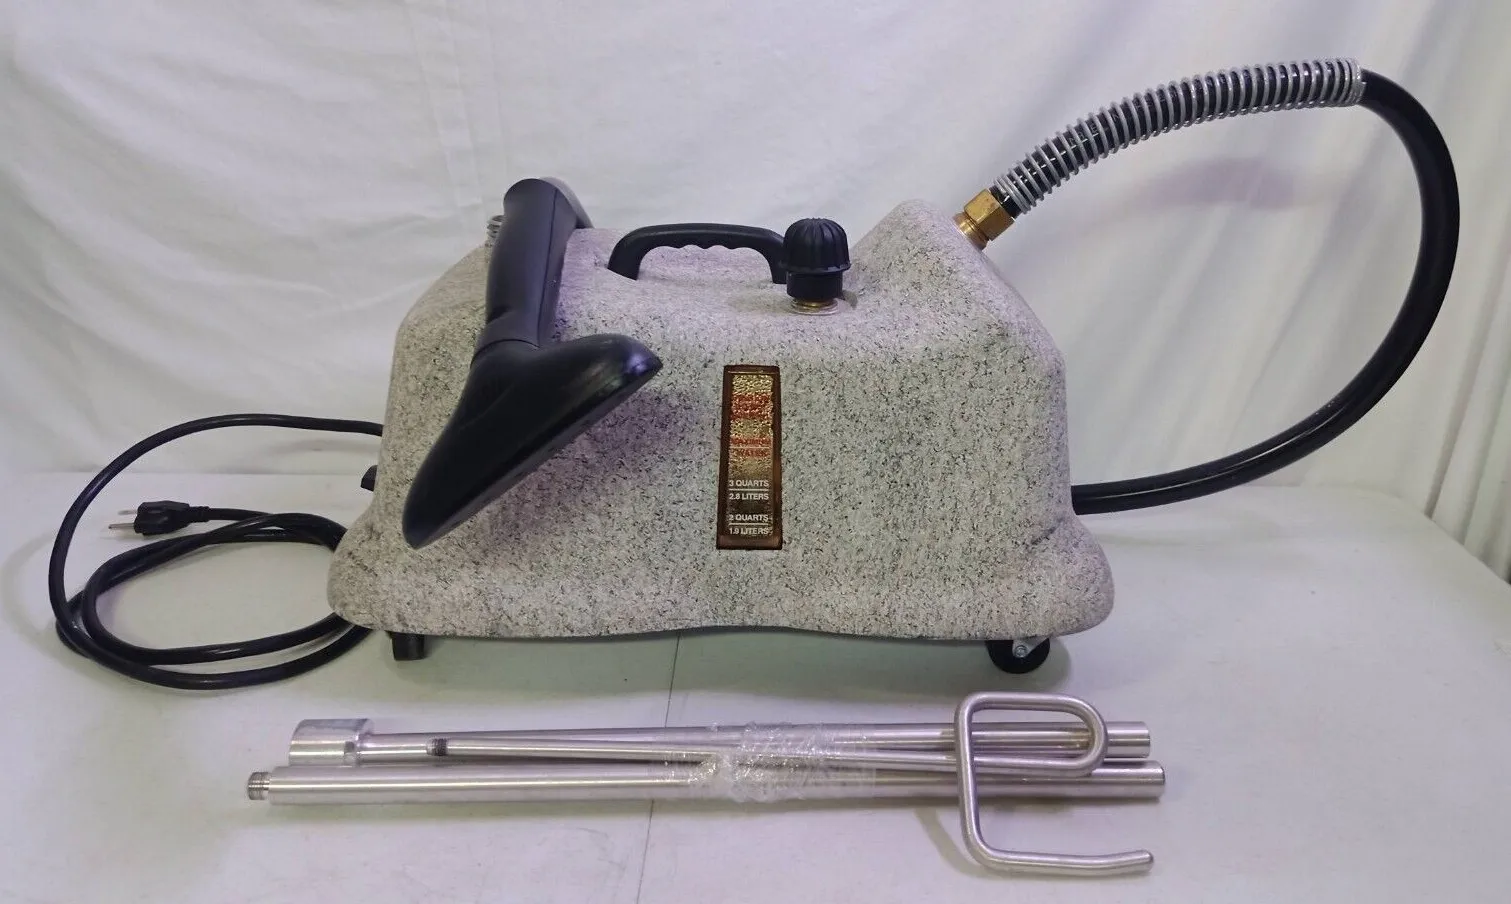 Jiffy J-4000 Pro-line Commercial Garment Steamer W/accessories - Not Working